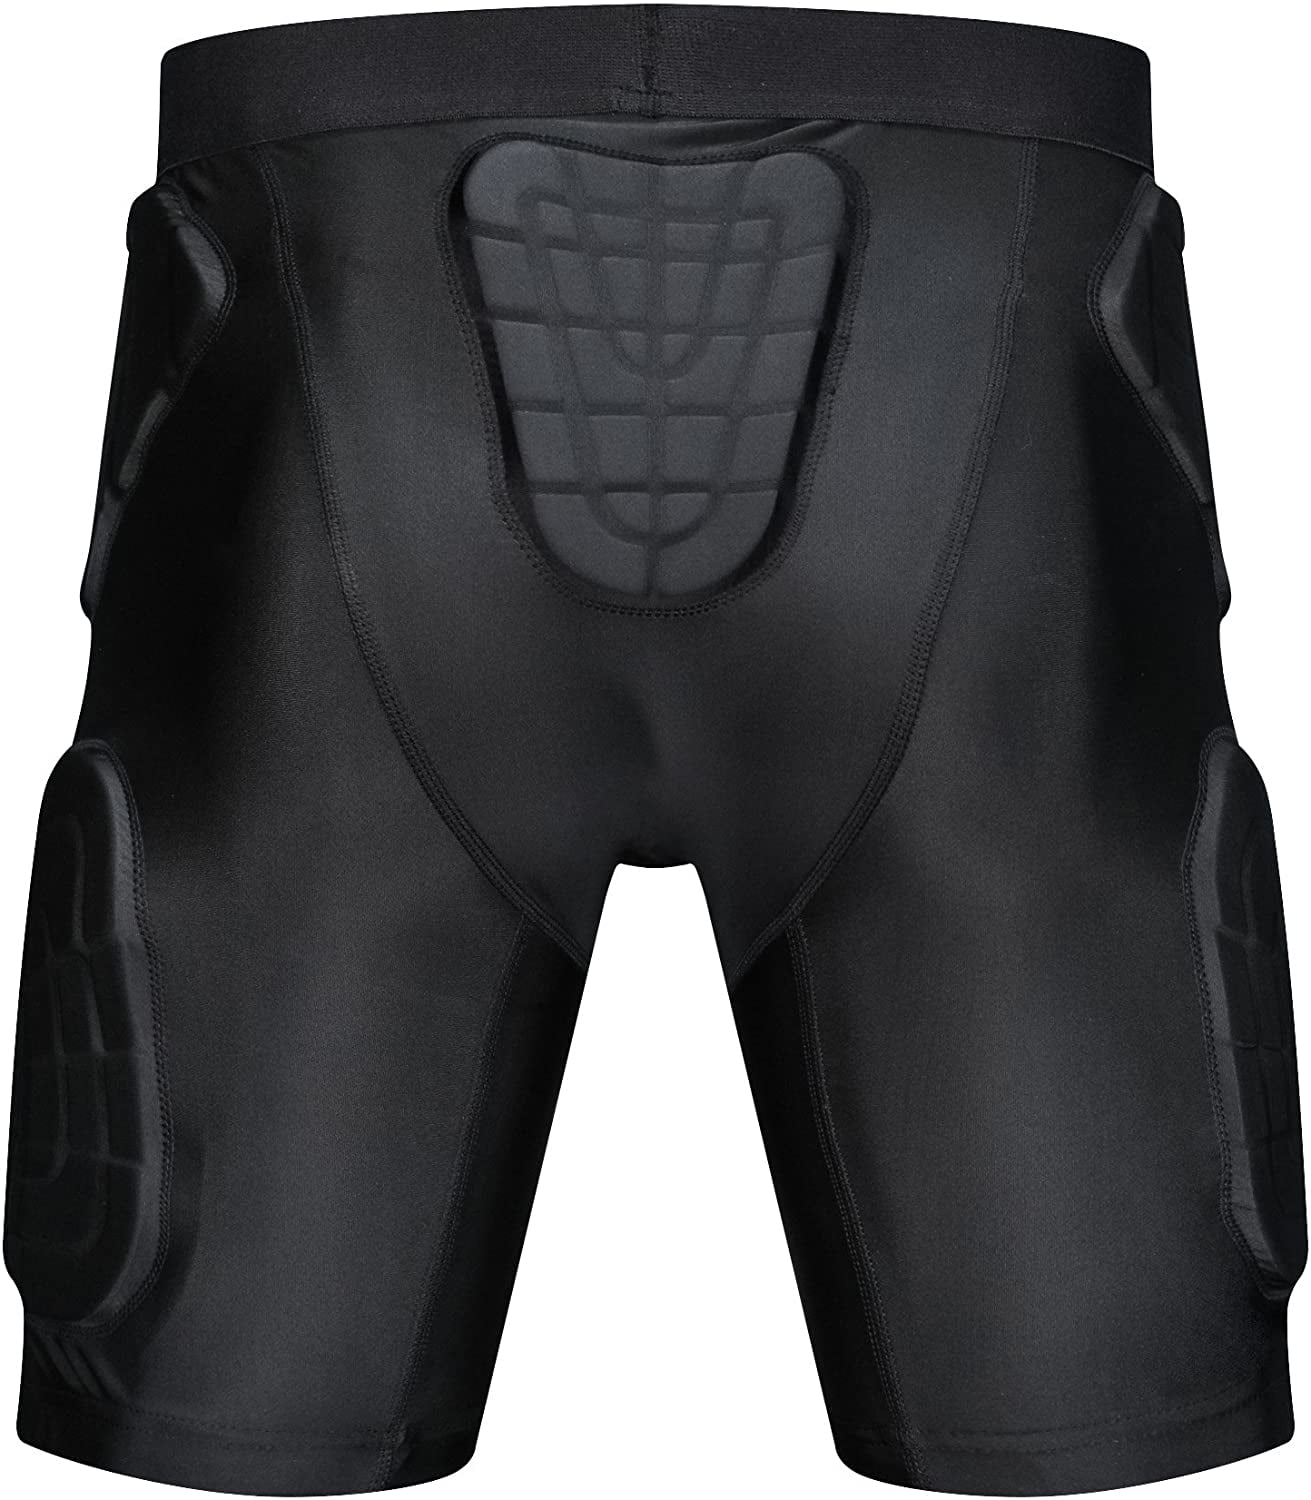 Schutt ProTech Tri All-in-One Football Girdle Padded Compression Shorts  with Integrated Hip, Tailbone and Thigh Pads, Varsity, Charcoal/White,  Medium